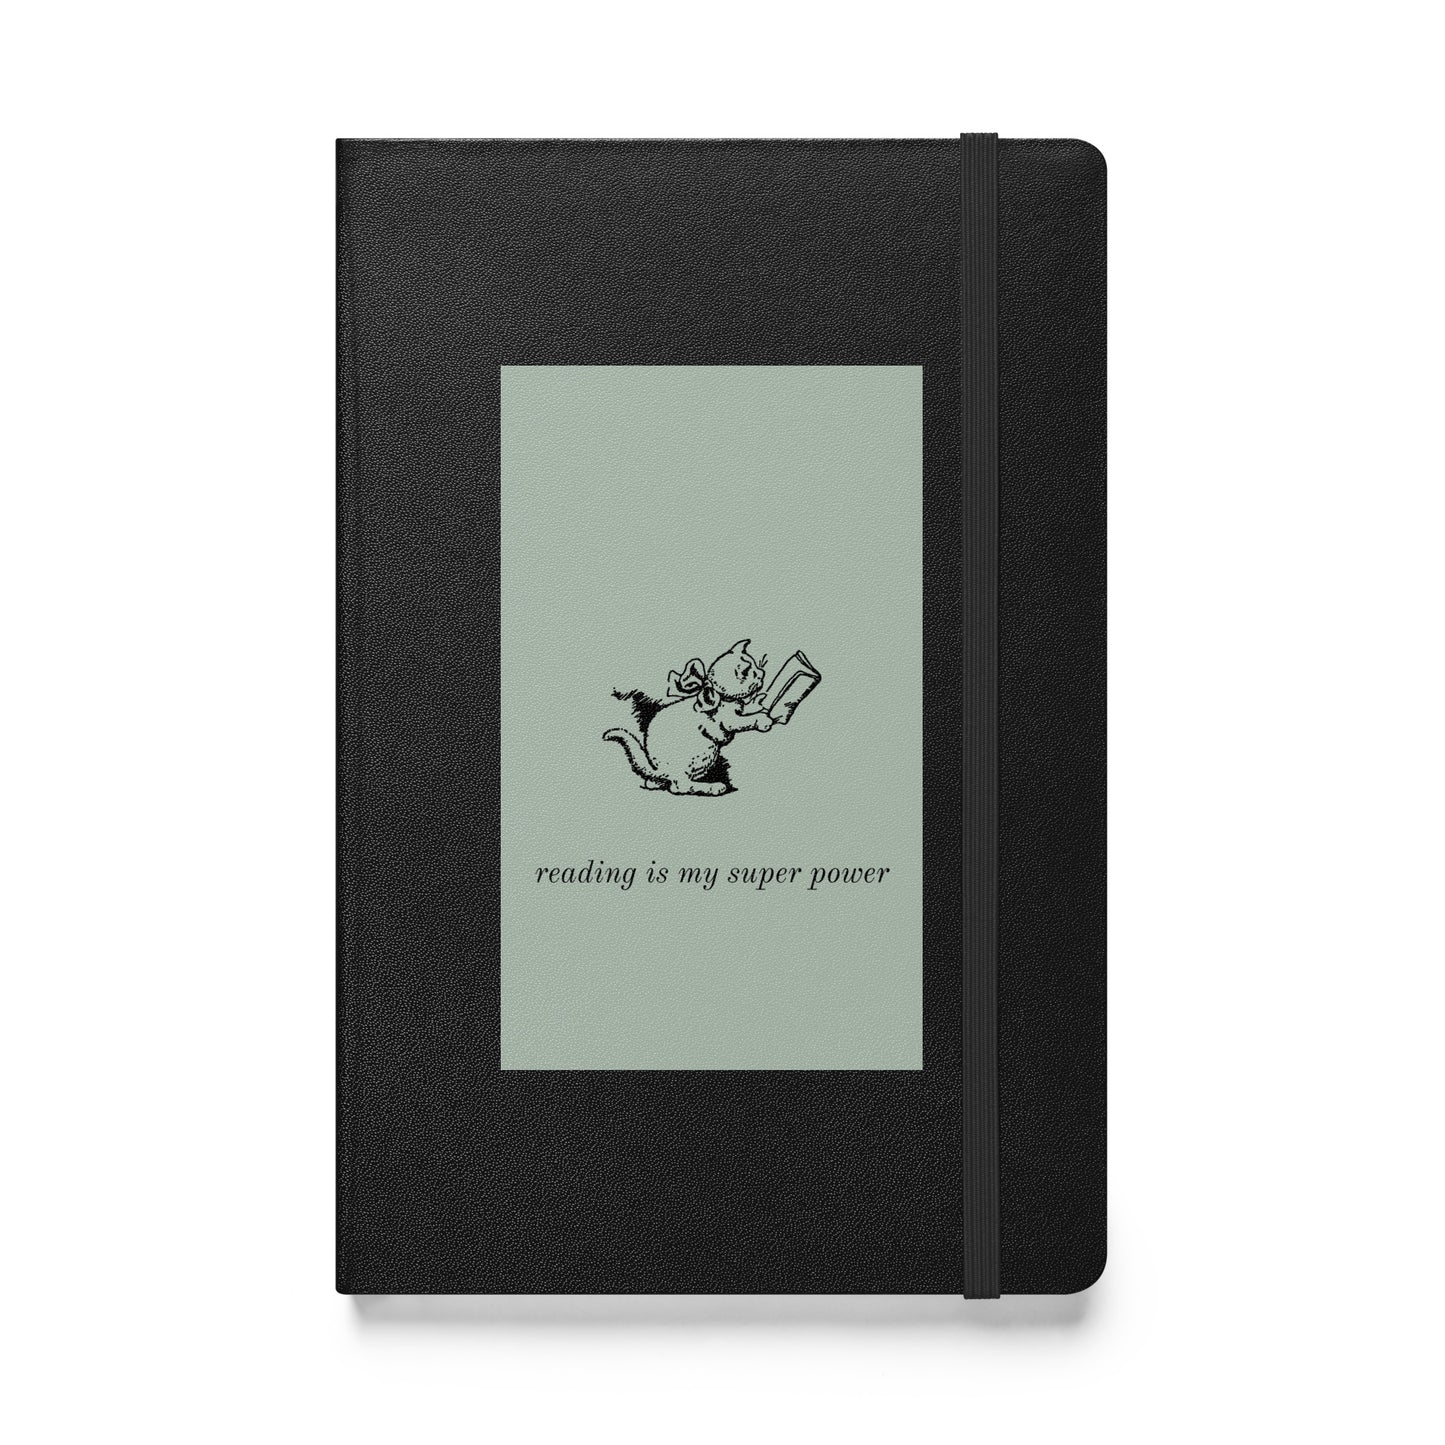 Reading is My Super Power - Hardcover bound notebook